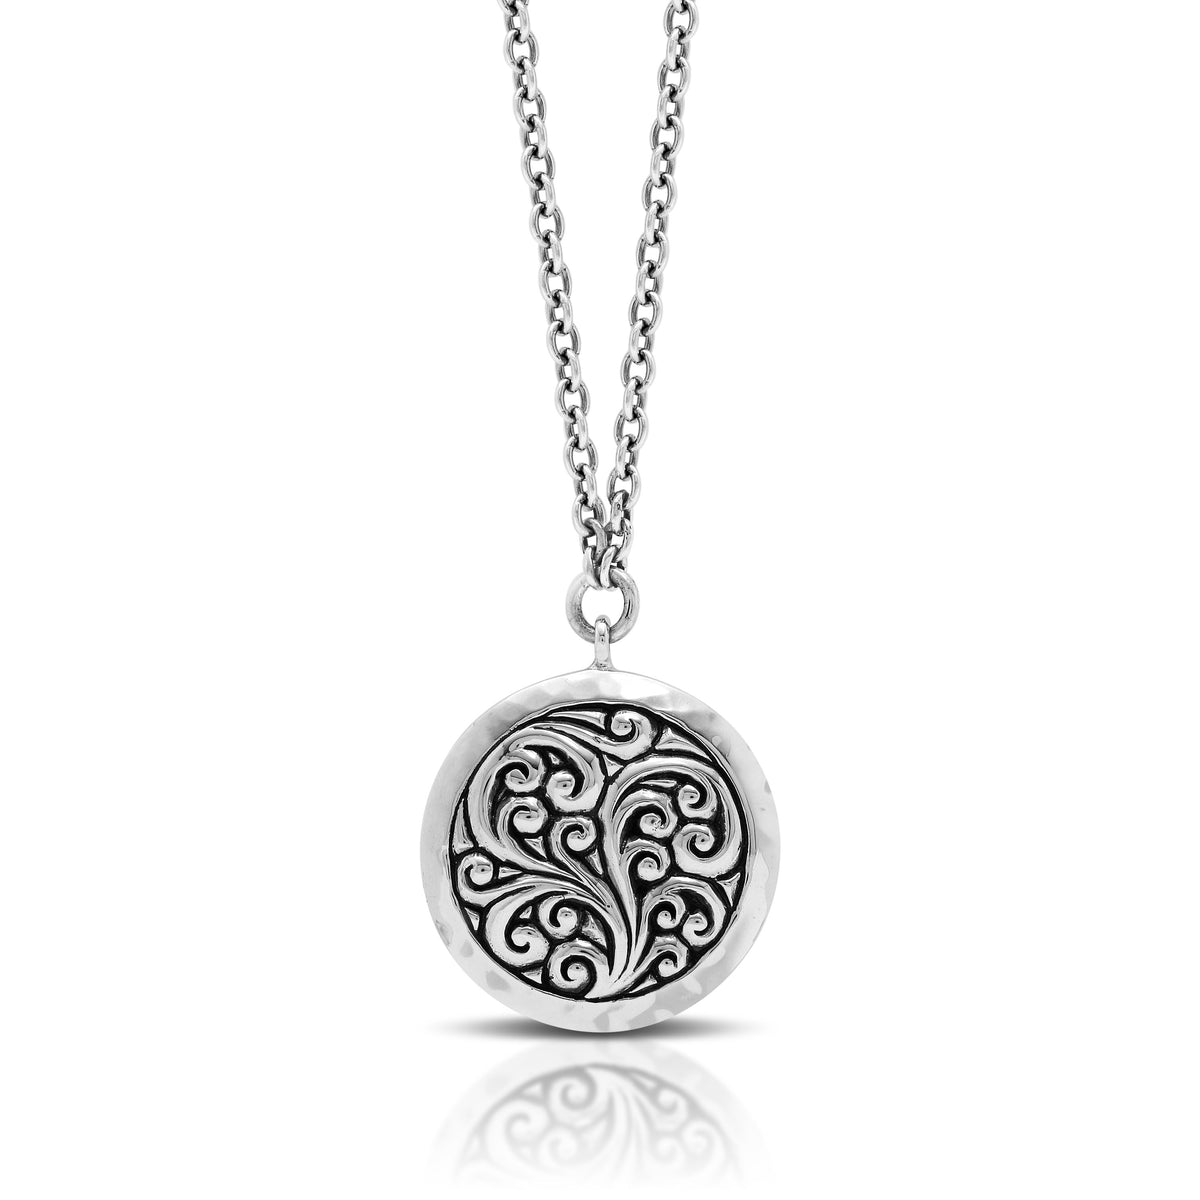 LH Scroll Repousse Round Pendant (24mm) Necklace 19" - 20" Chain